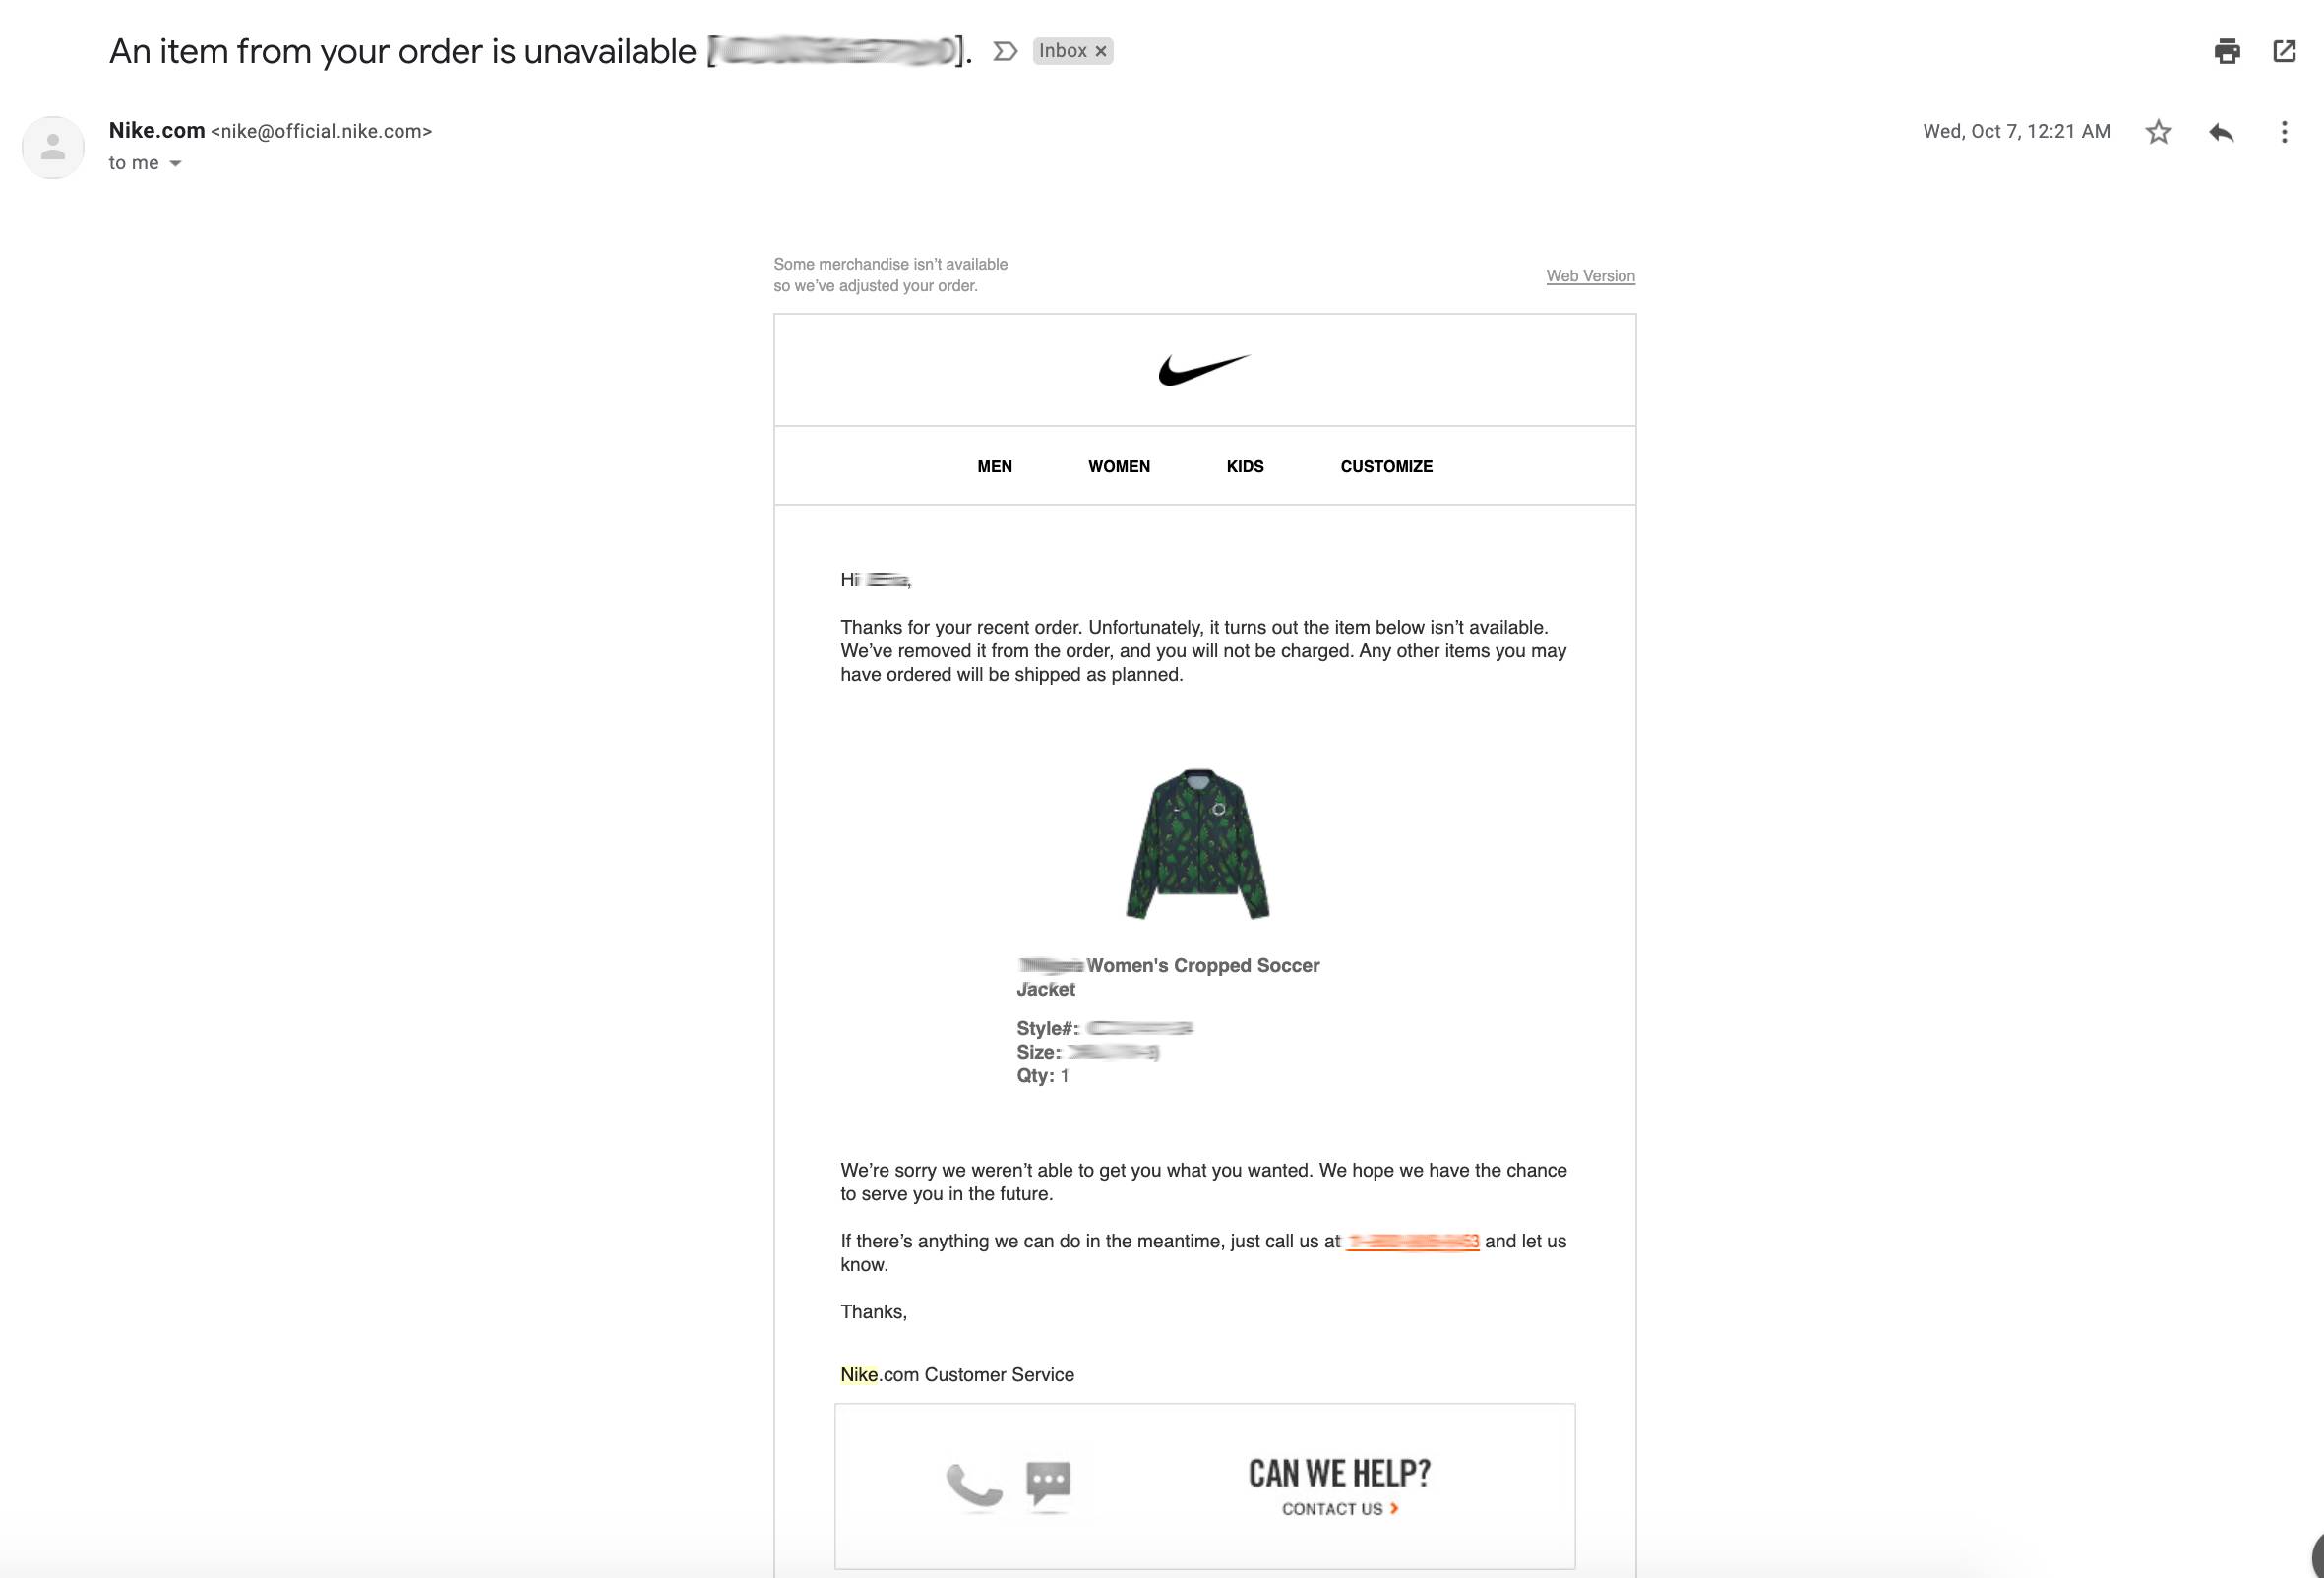 Personalized customer email from Nike.com notifying customer of canceled order